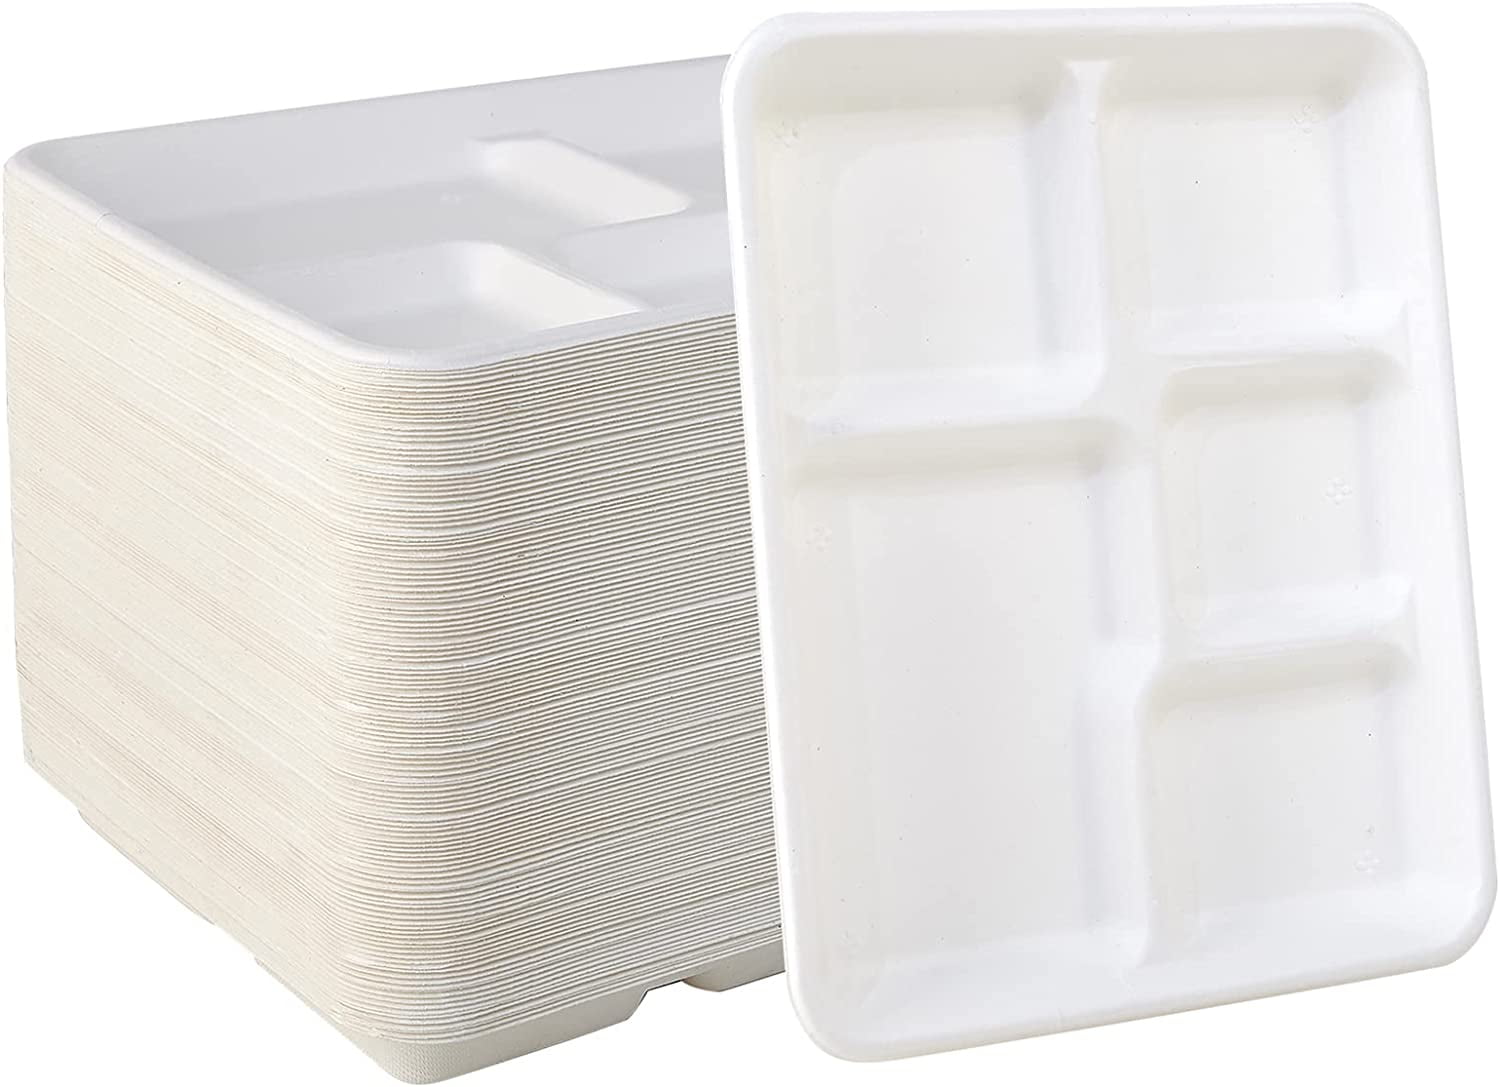 Vplus 100% Compostable 6 Compartment Plates, 90 Pack Compartment Paper Plate, 12.5 * 8.6 inch Disposable School Lunch Trays, Eco-Friendly Bagasse